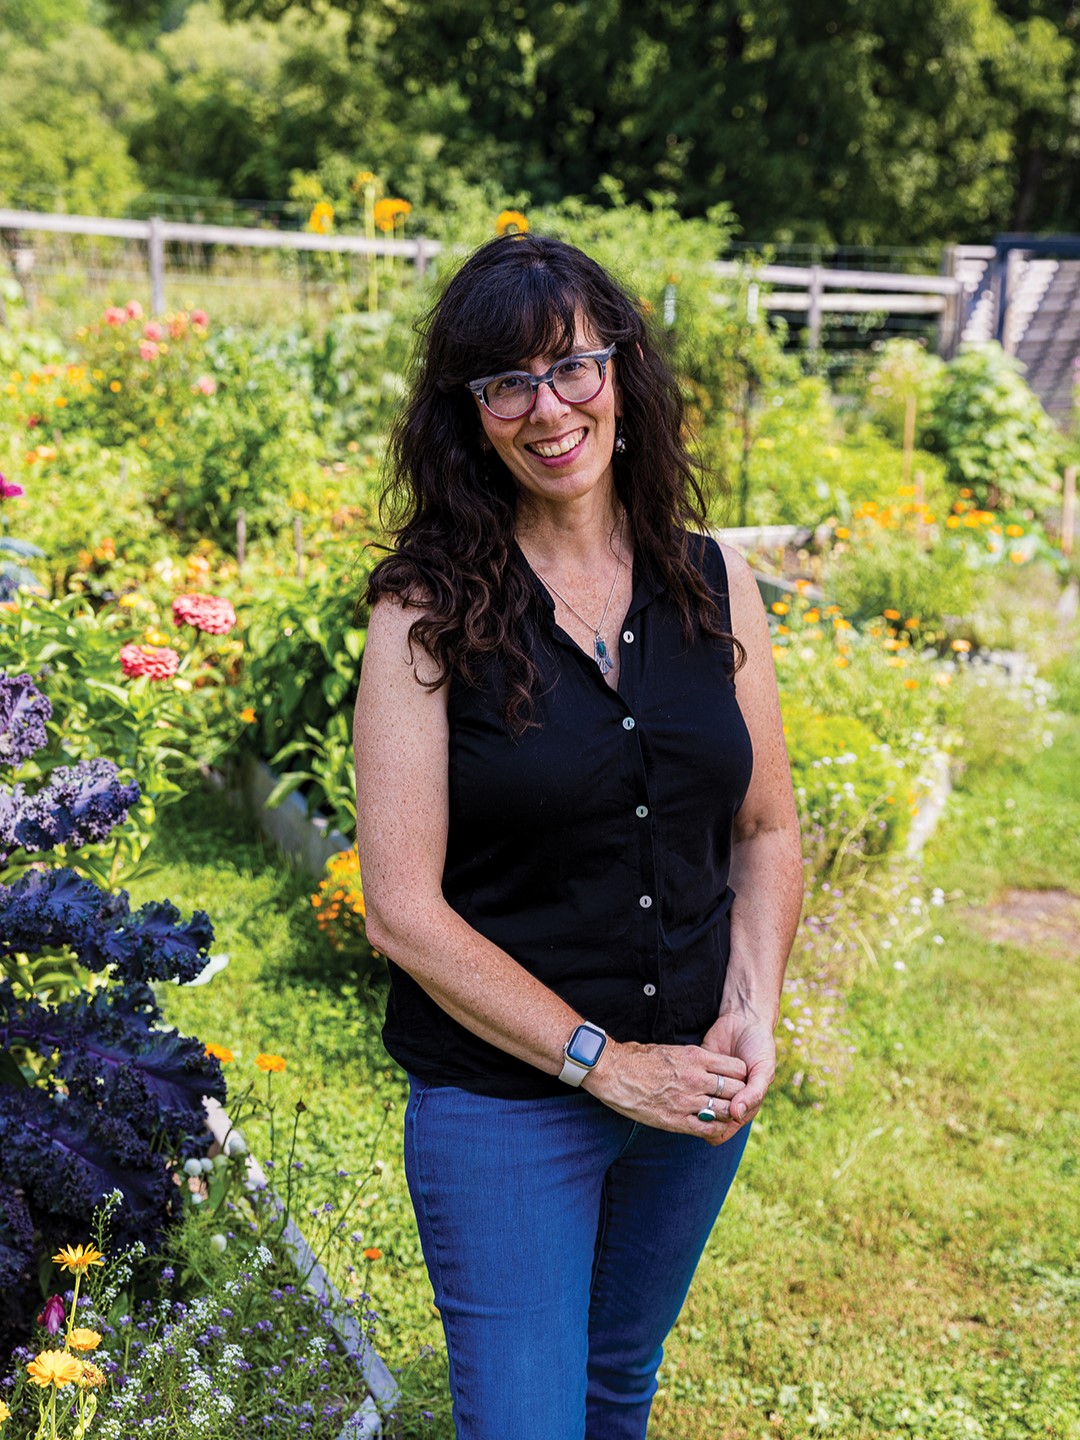 It’s safe to say that Meg Cowden could reclassify her home garden into a bounitful farmers market. Just the vegetable and annual flower varieties nearly equal 200. Keep counting. There’s more to be found at this Long Lake garden.